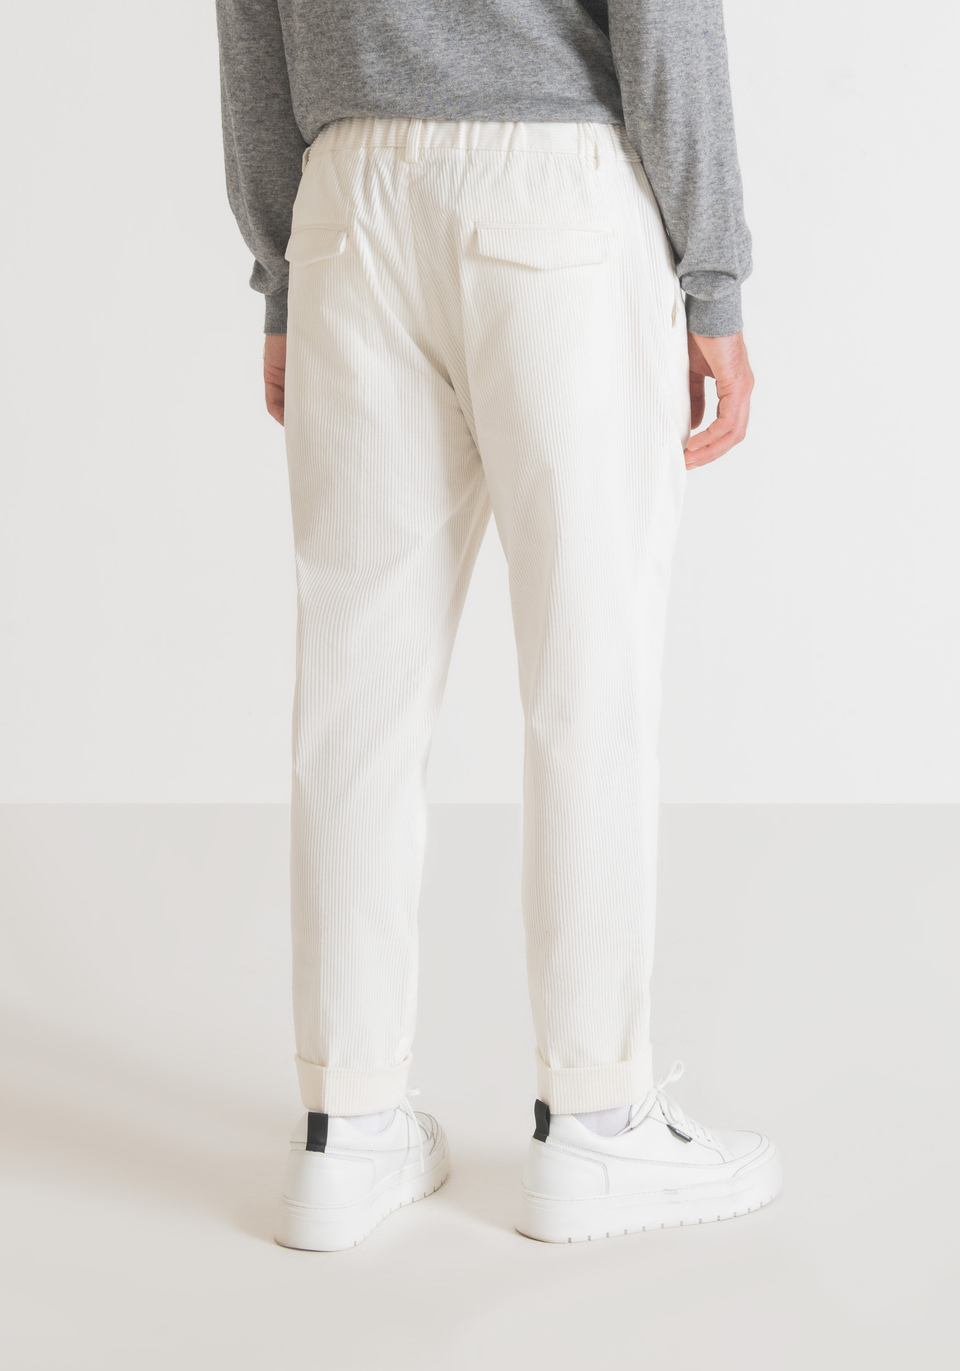 "GUSTAF" CARROT FIT TROUSERS IN CORDUROY WITH ELASTICATED WAISTBAND AND DRAWSTRING - Antony Morato Online Shop